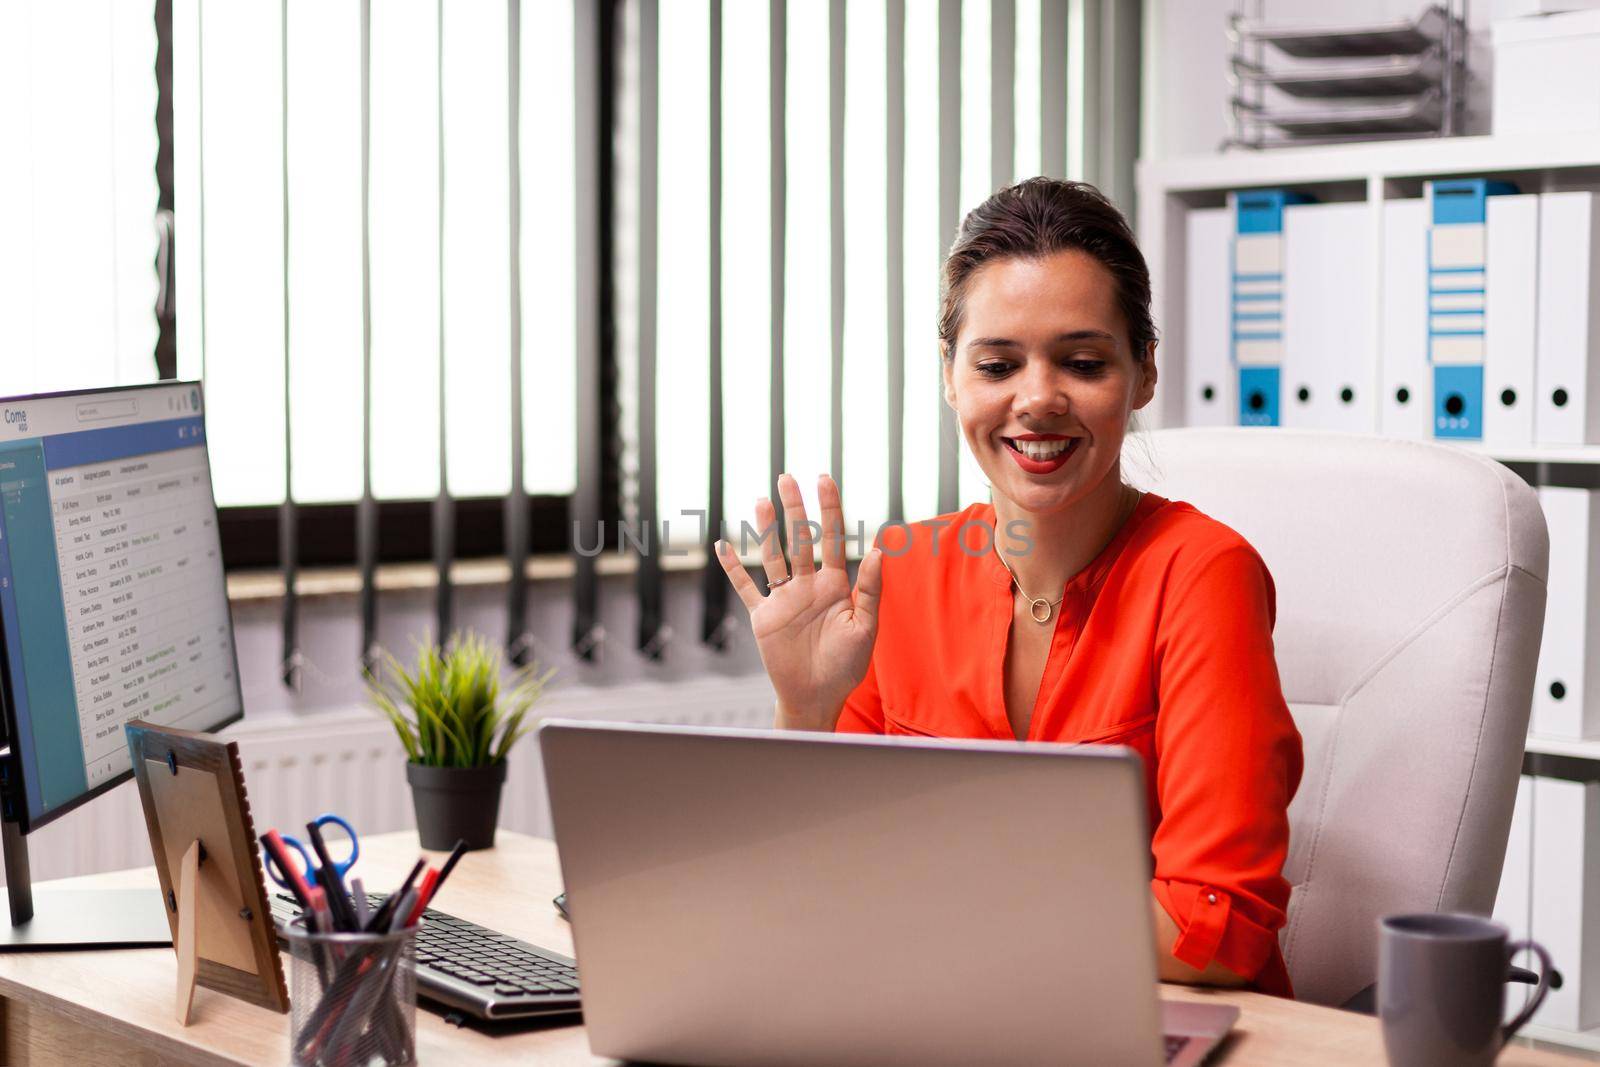 Businesswoman waving at notebook webcam during video conference with coworkers. Entrepreneur using internet connection for video meeting with coworkers looking at webcam.